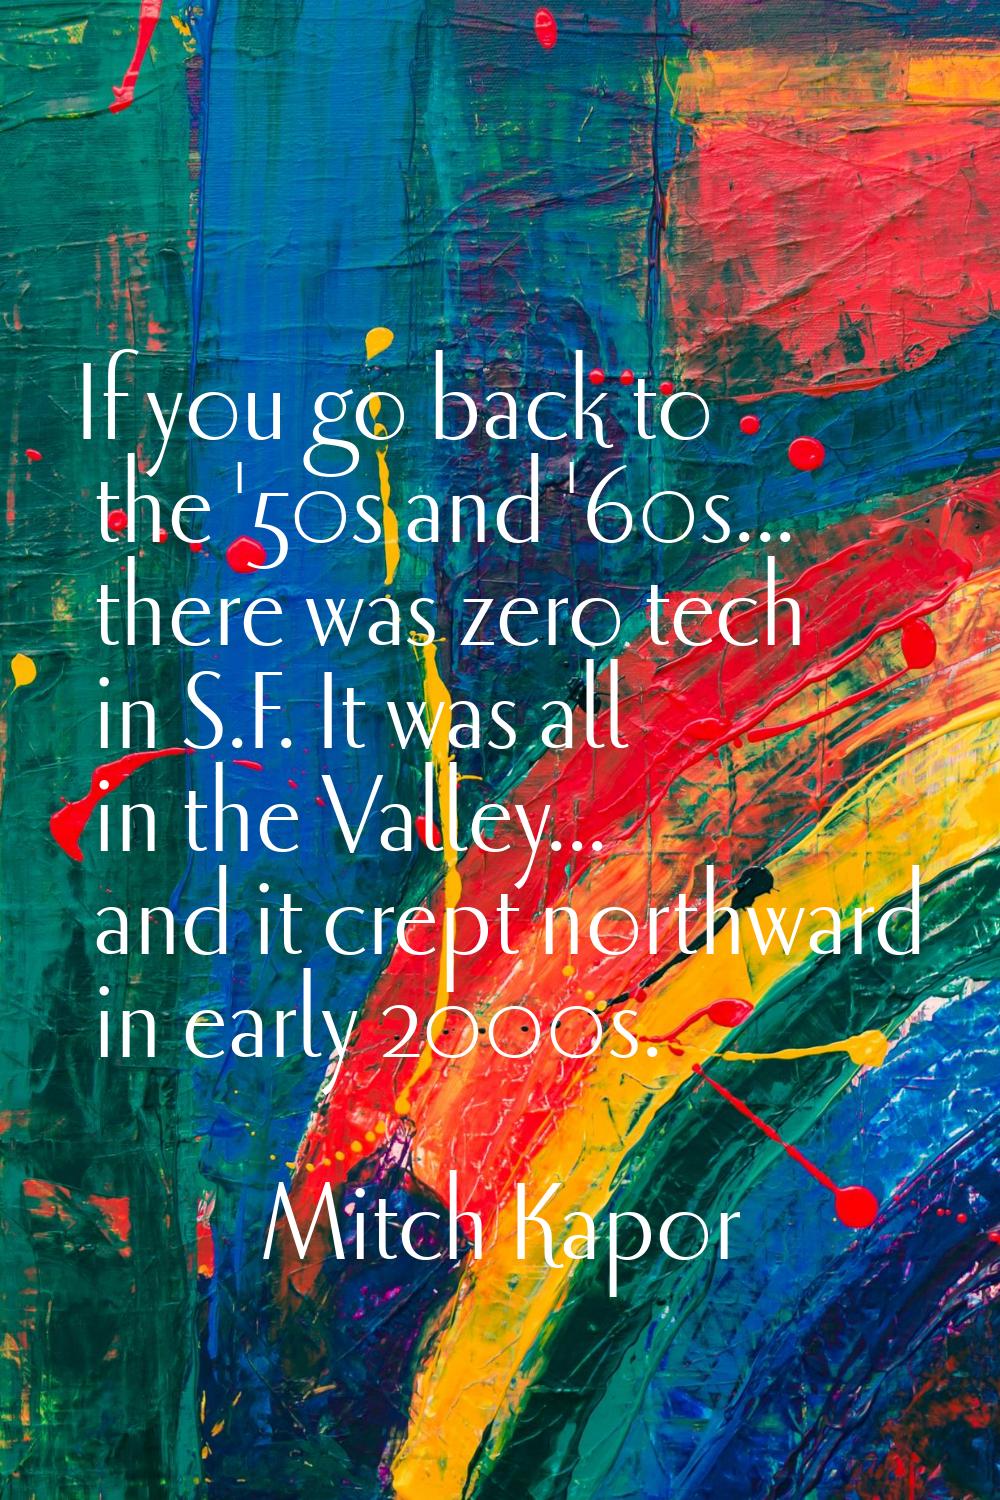 If you go back to the '50s and '60s... there was zero tech in S.F. It was all in the Valley... and 